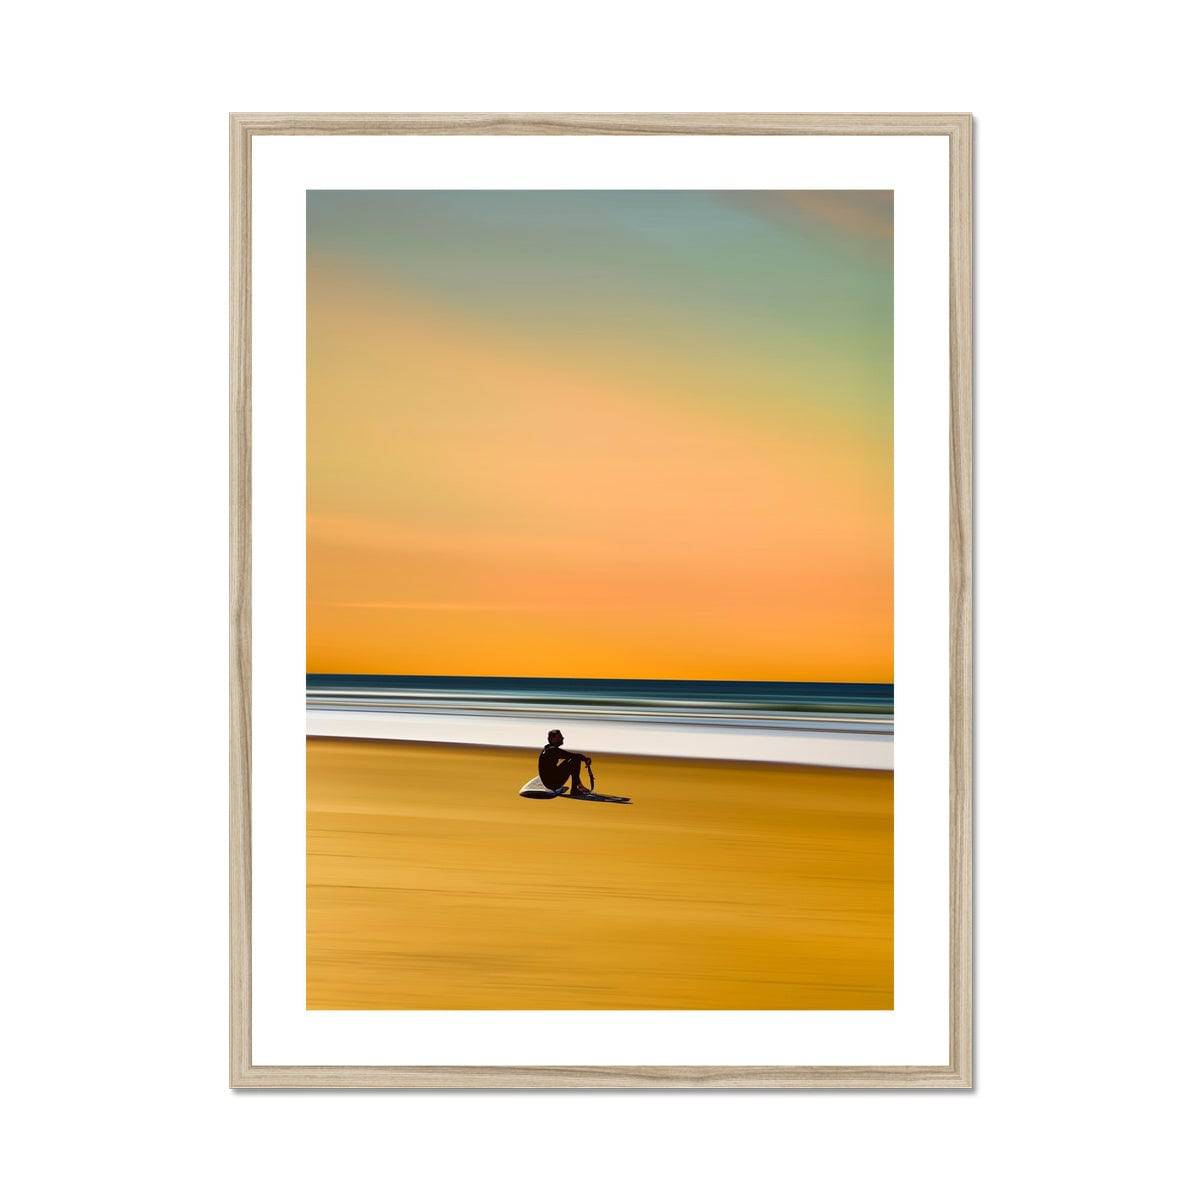 New Flow Framed & Mounted Print - Pixel Gallery